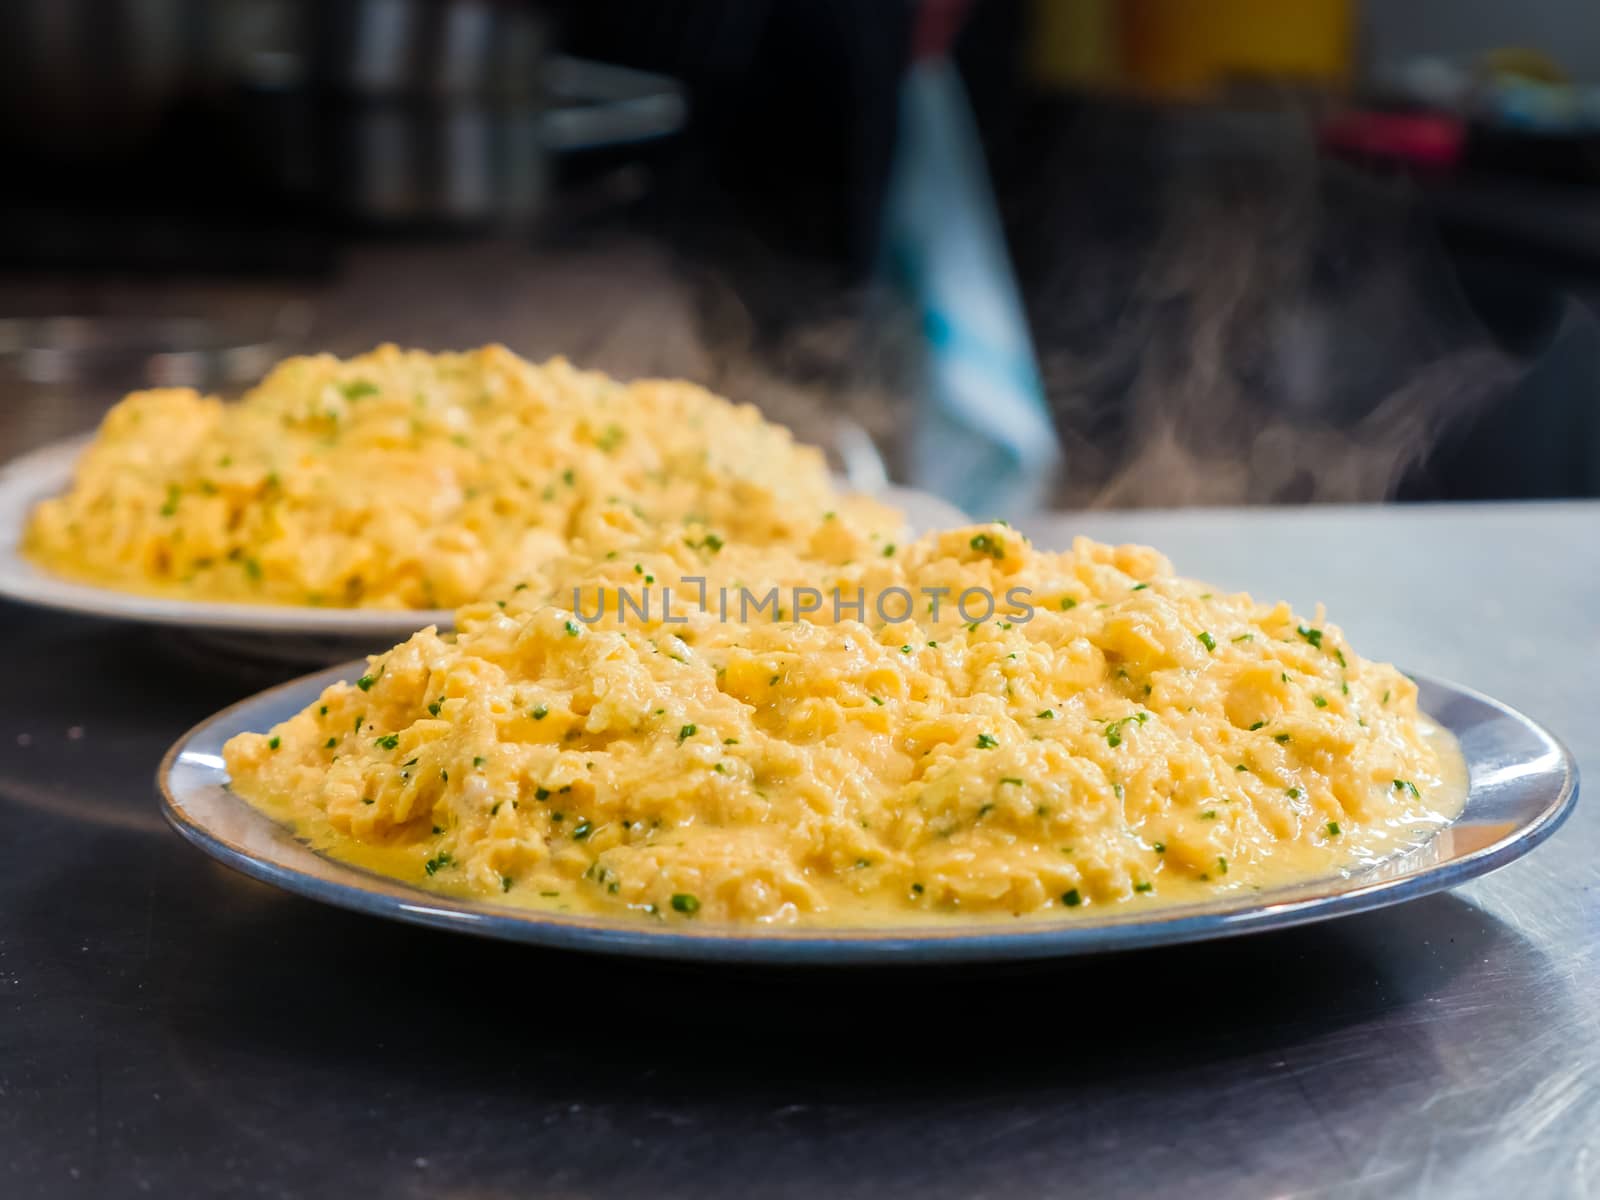 Two Scrambled Eggs Omelet Plates in a Restaurant Kitchen